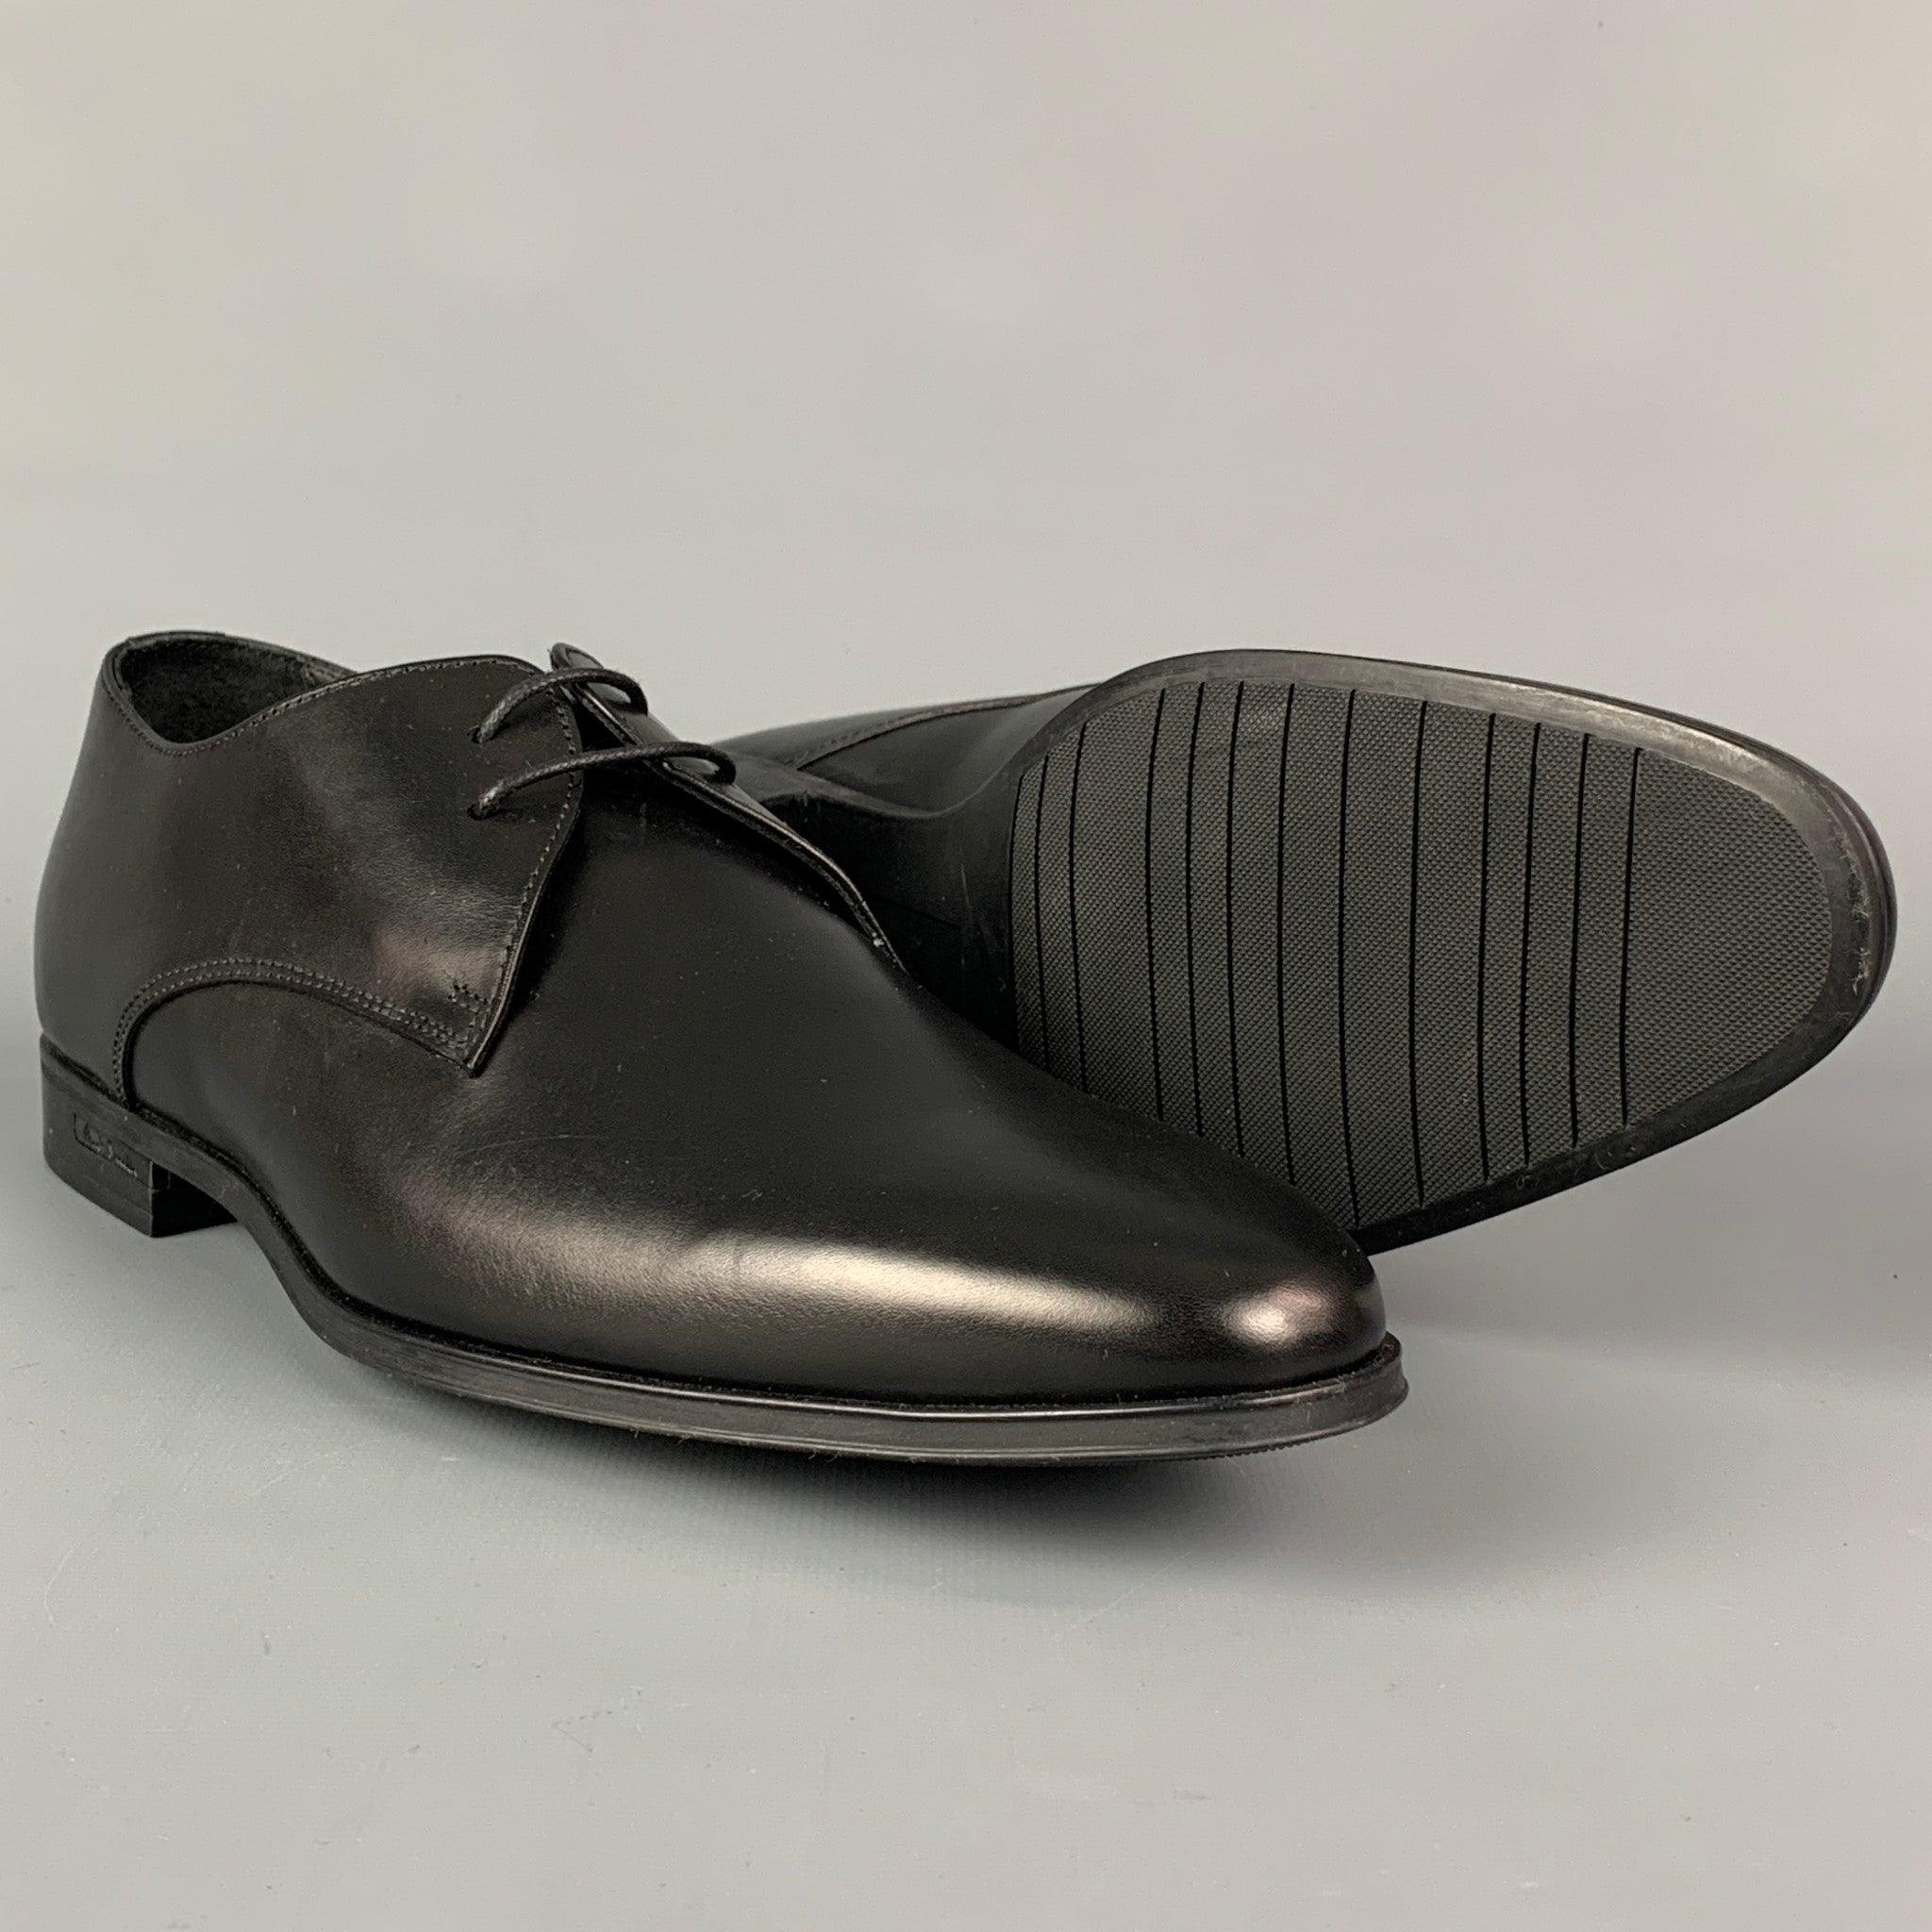 PAUL SMITH Size 7 Black Leather Lace Up Shoes In Good Condition For Sale In San Francisco, CA